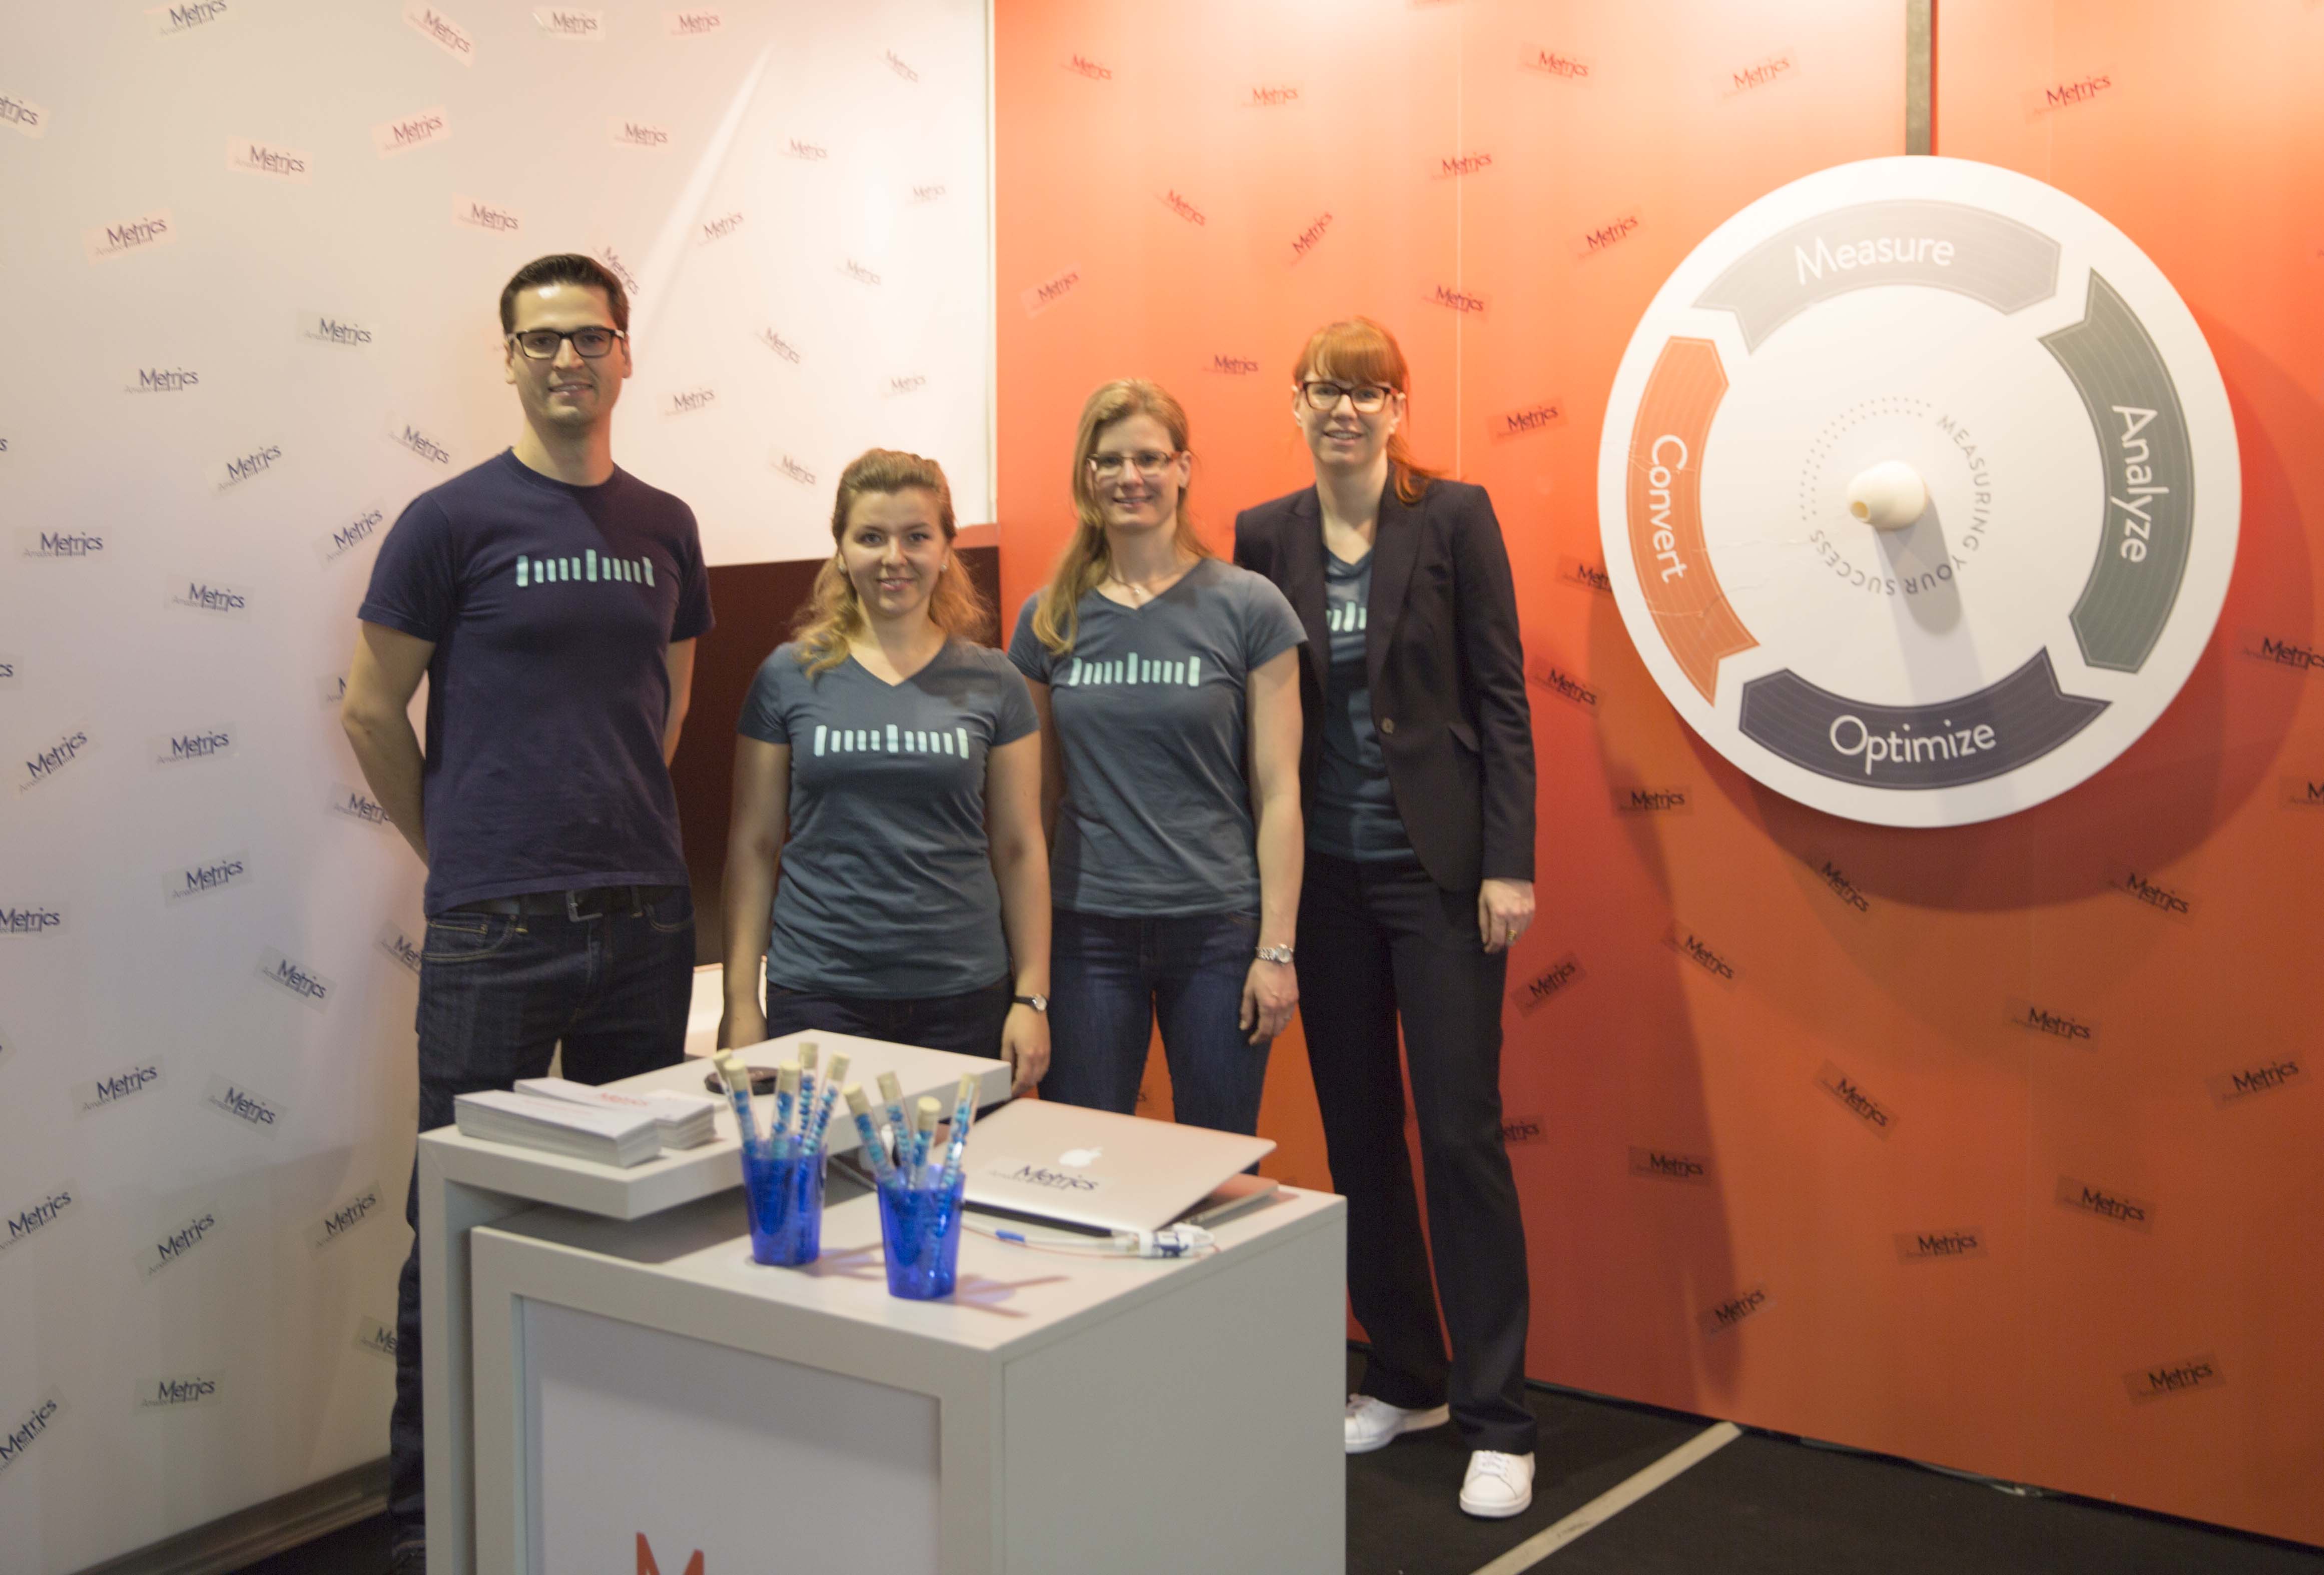 The Amazee Metrics team at our booth at SOM 2015